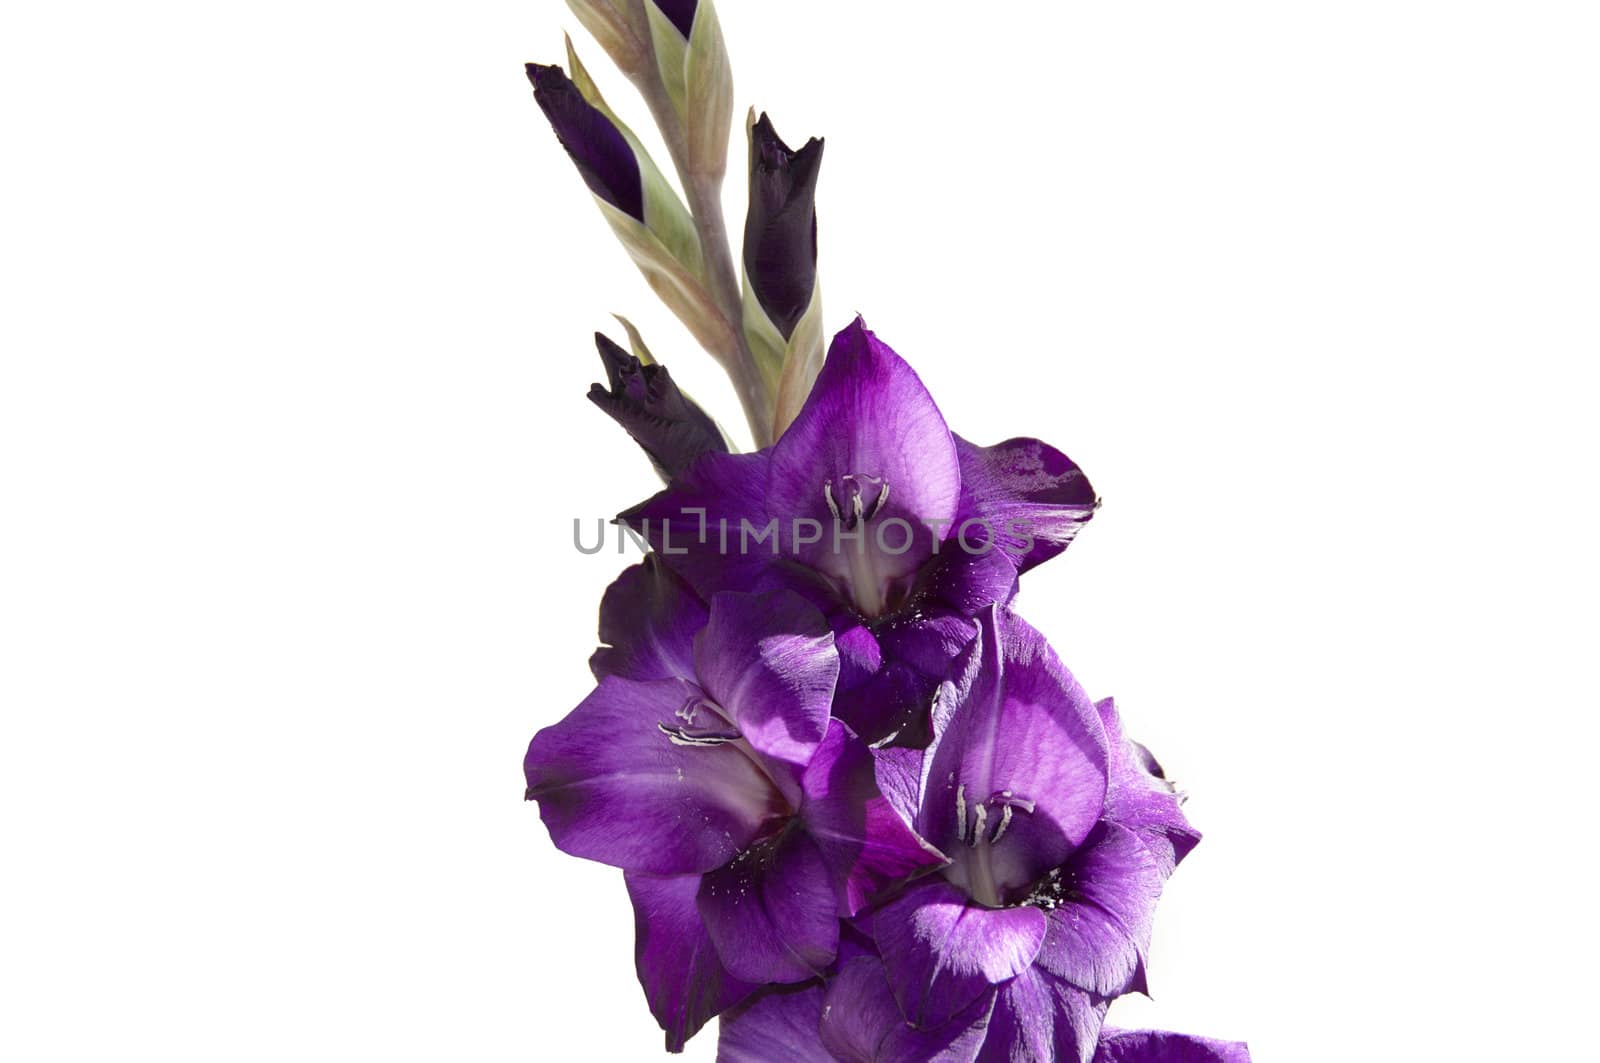 A purple gladiolus isolated on a white background